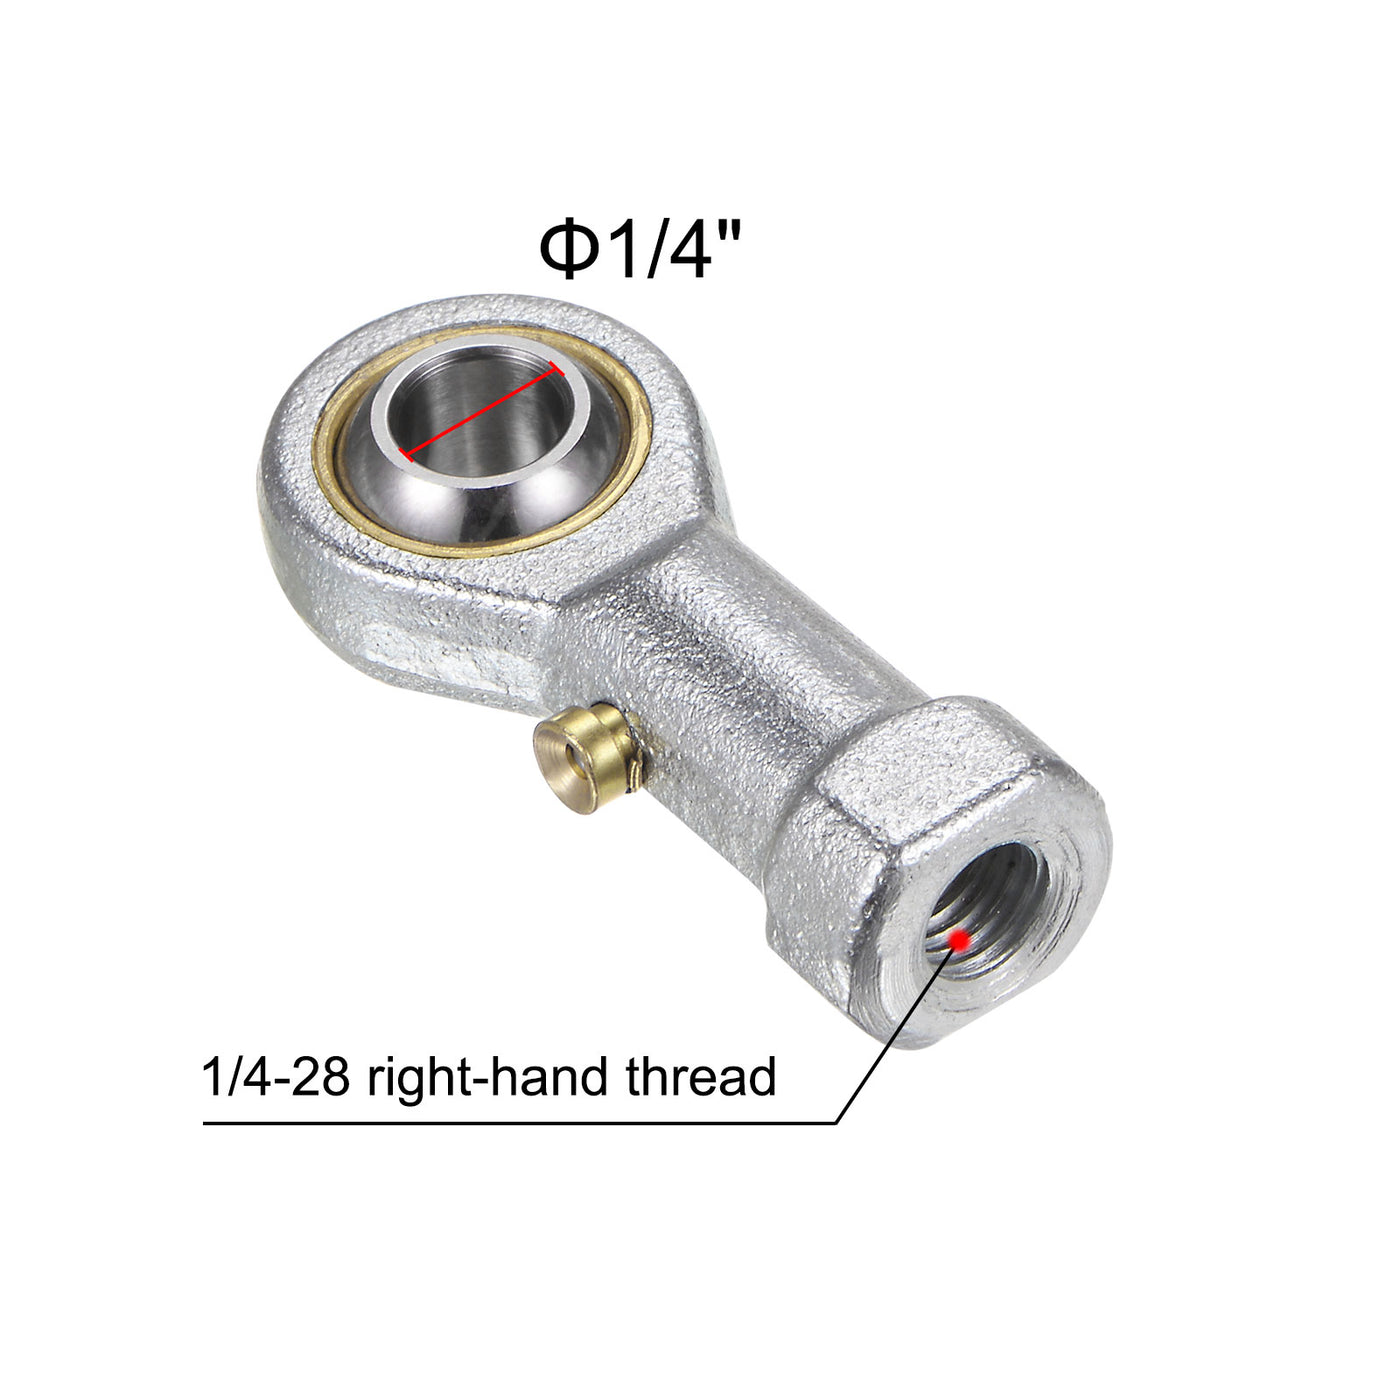 uxcell Uxcell PHSB4 Female Rod End 1/4" Bore and 1/4-28 Right Hand Thread,Includes Jam Nut